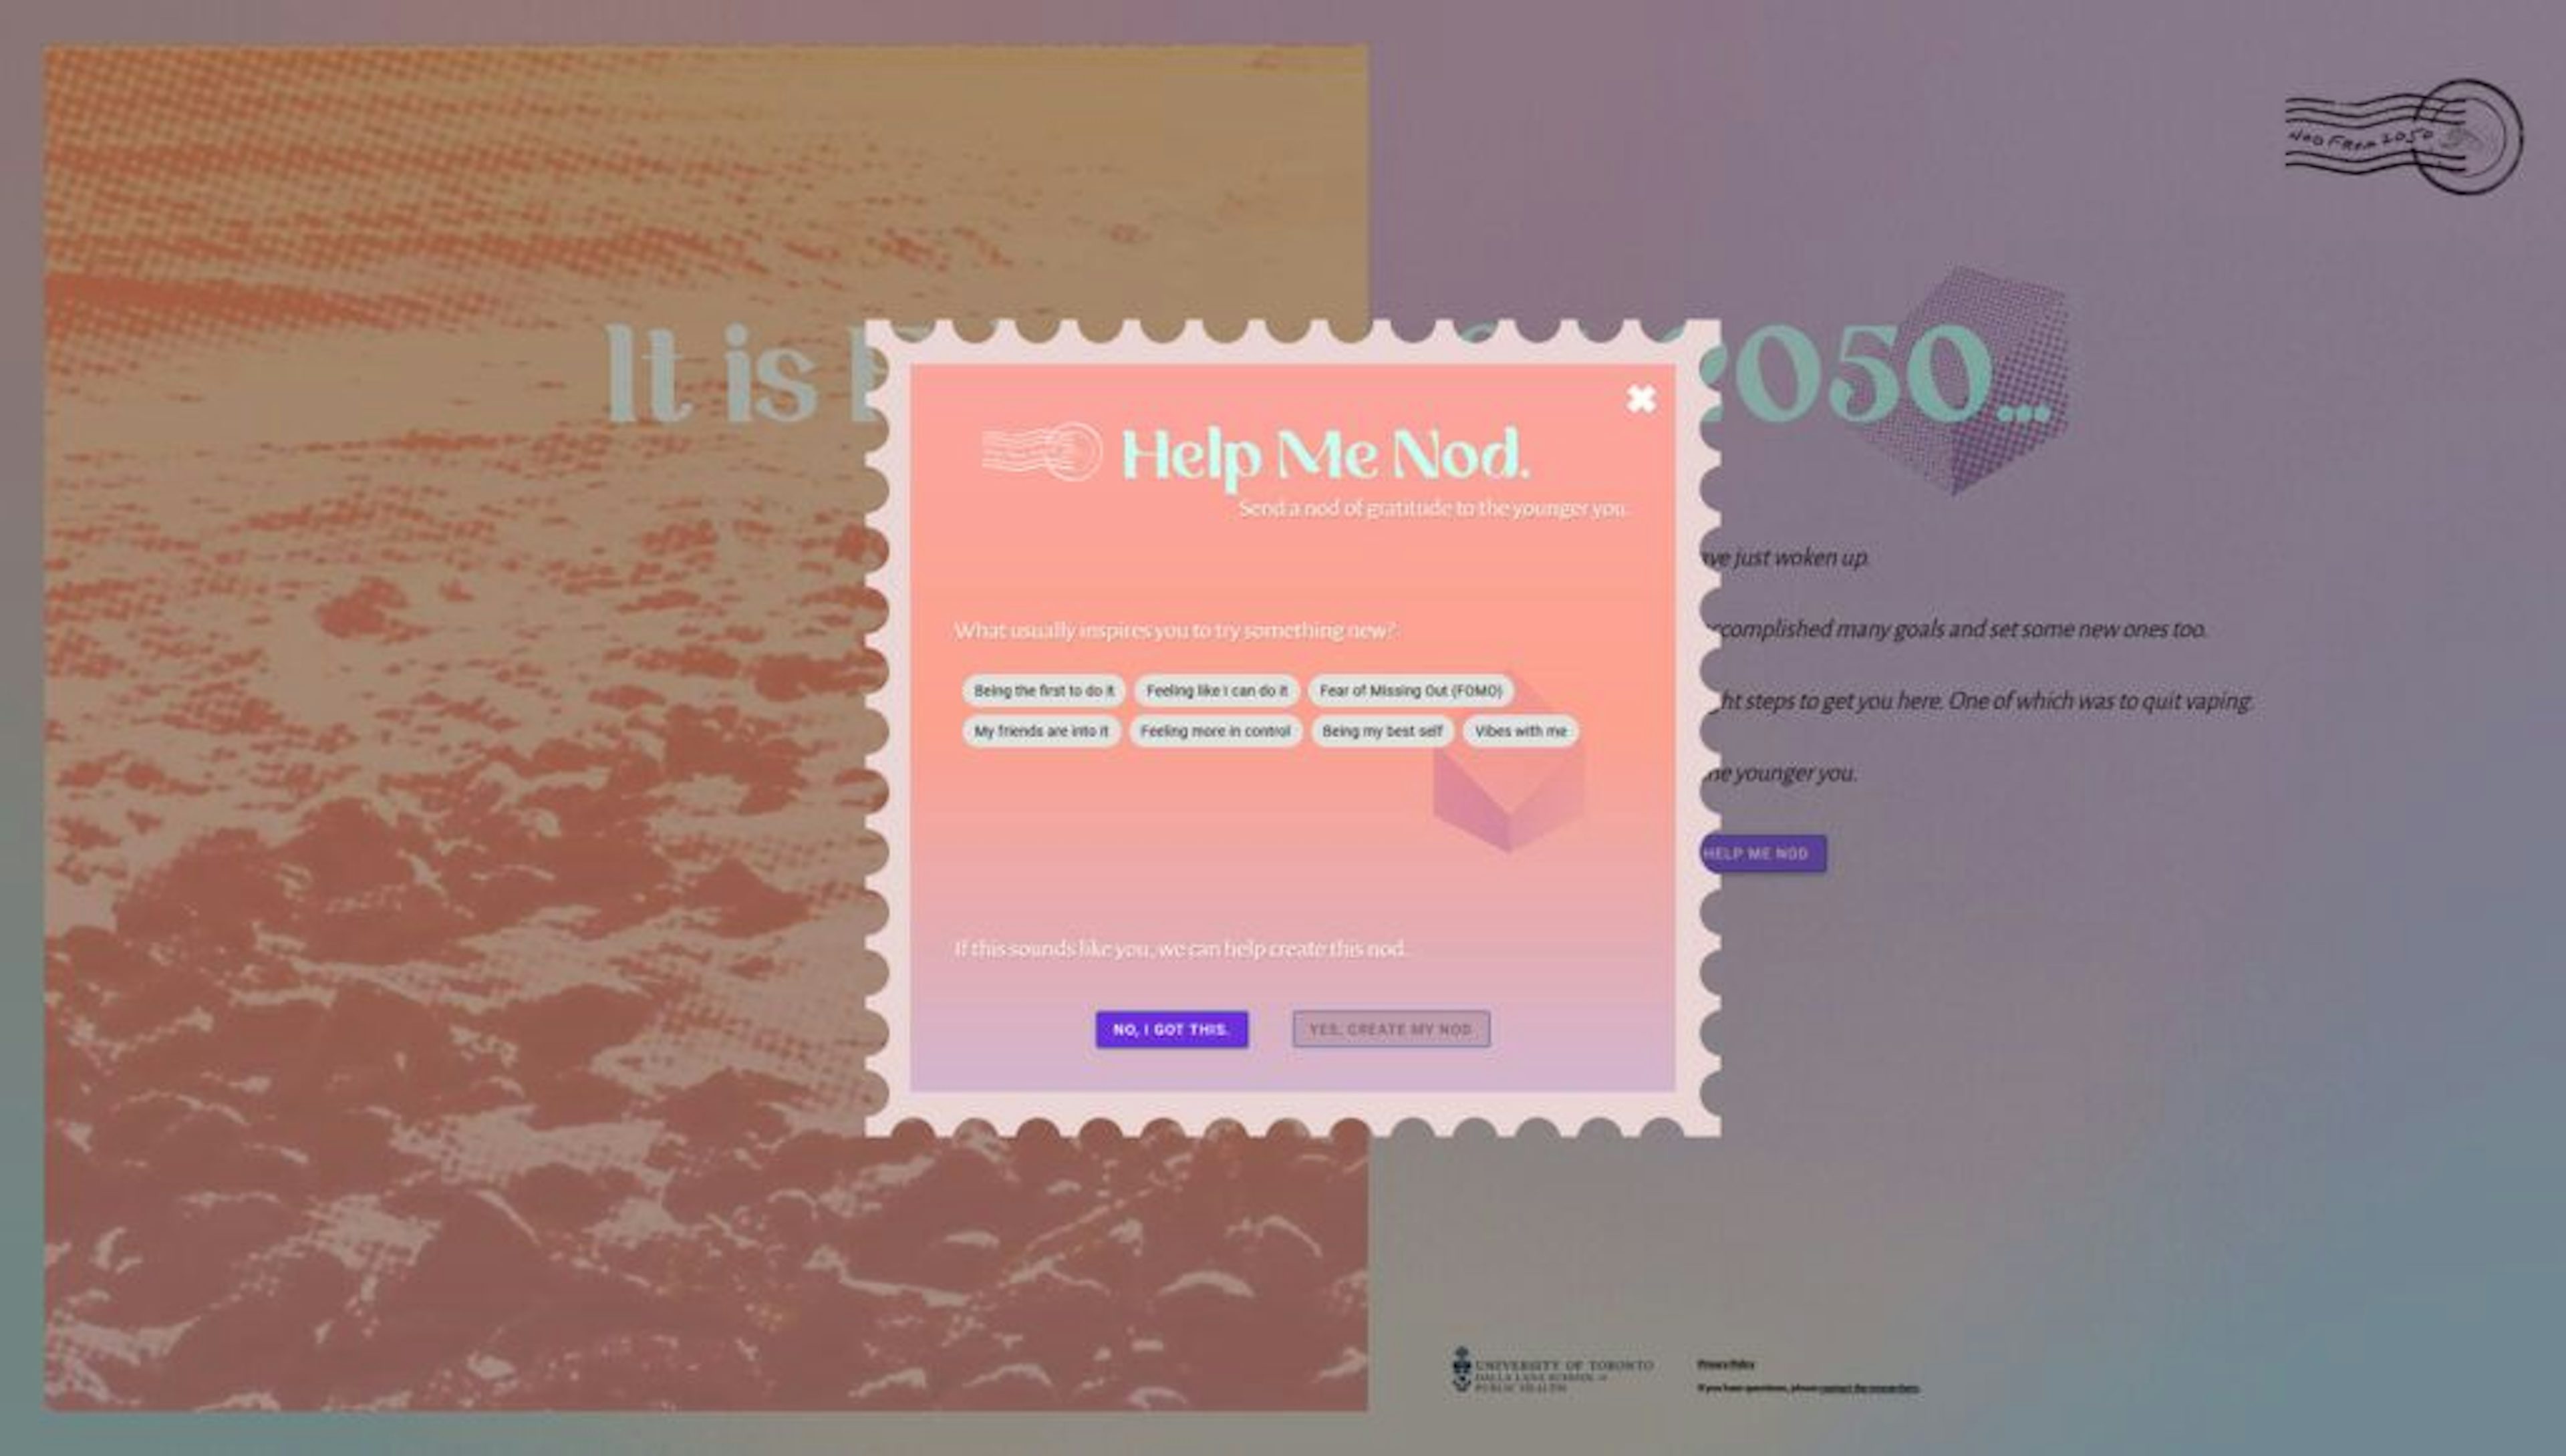 A screenshot of the  "Help me Nod" dialogue box displayed on the site.